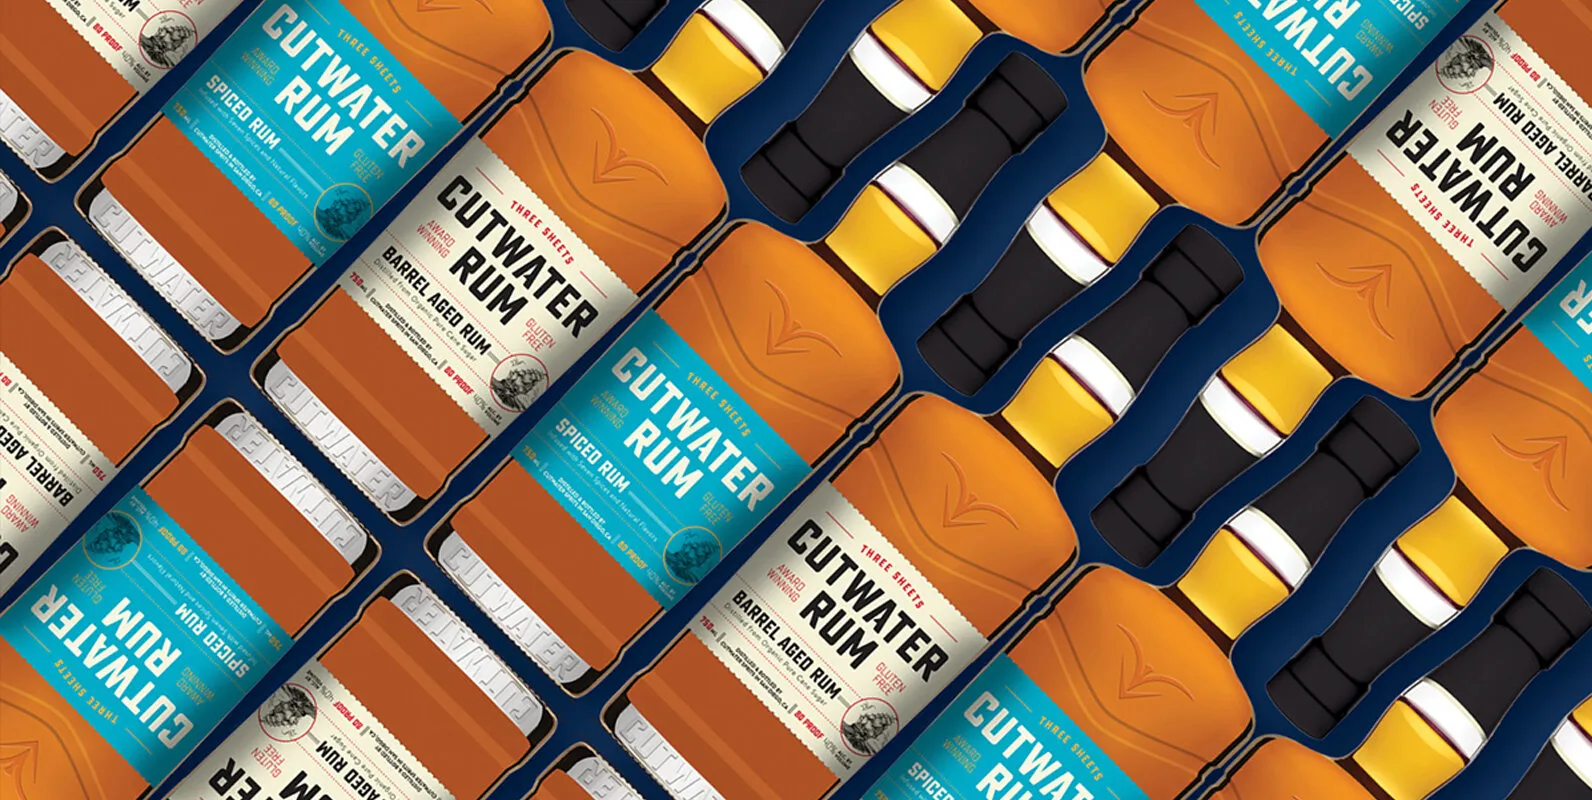 Cutwater Spirits Licenses Sucrose for Their Corporate Branding